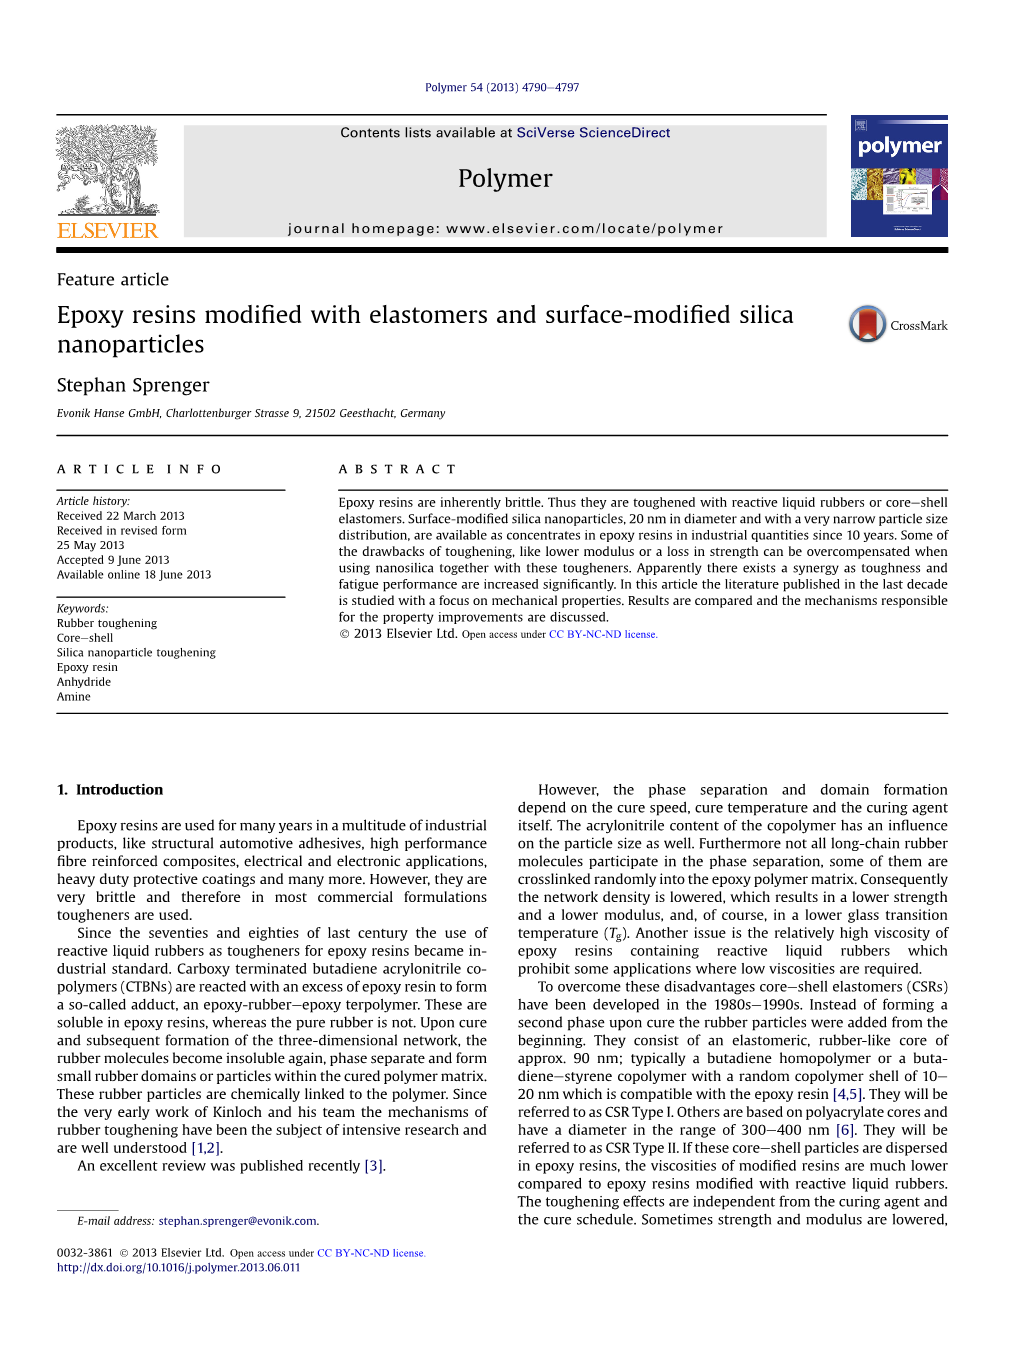 Epoxy Resins Modified with Elastomers and Surface-Modified Silica